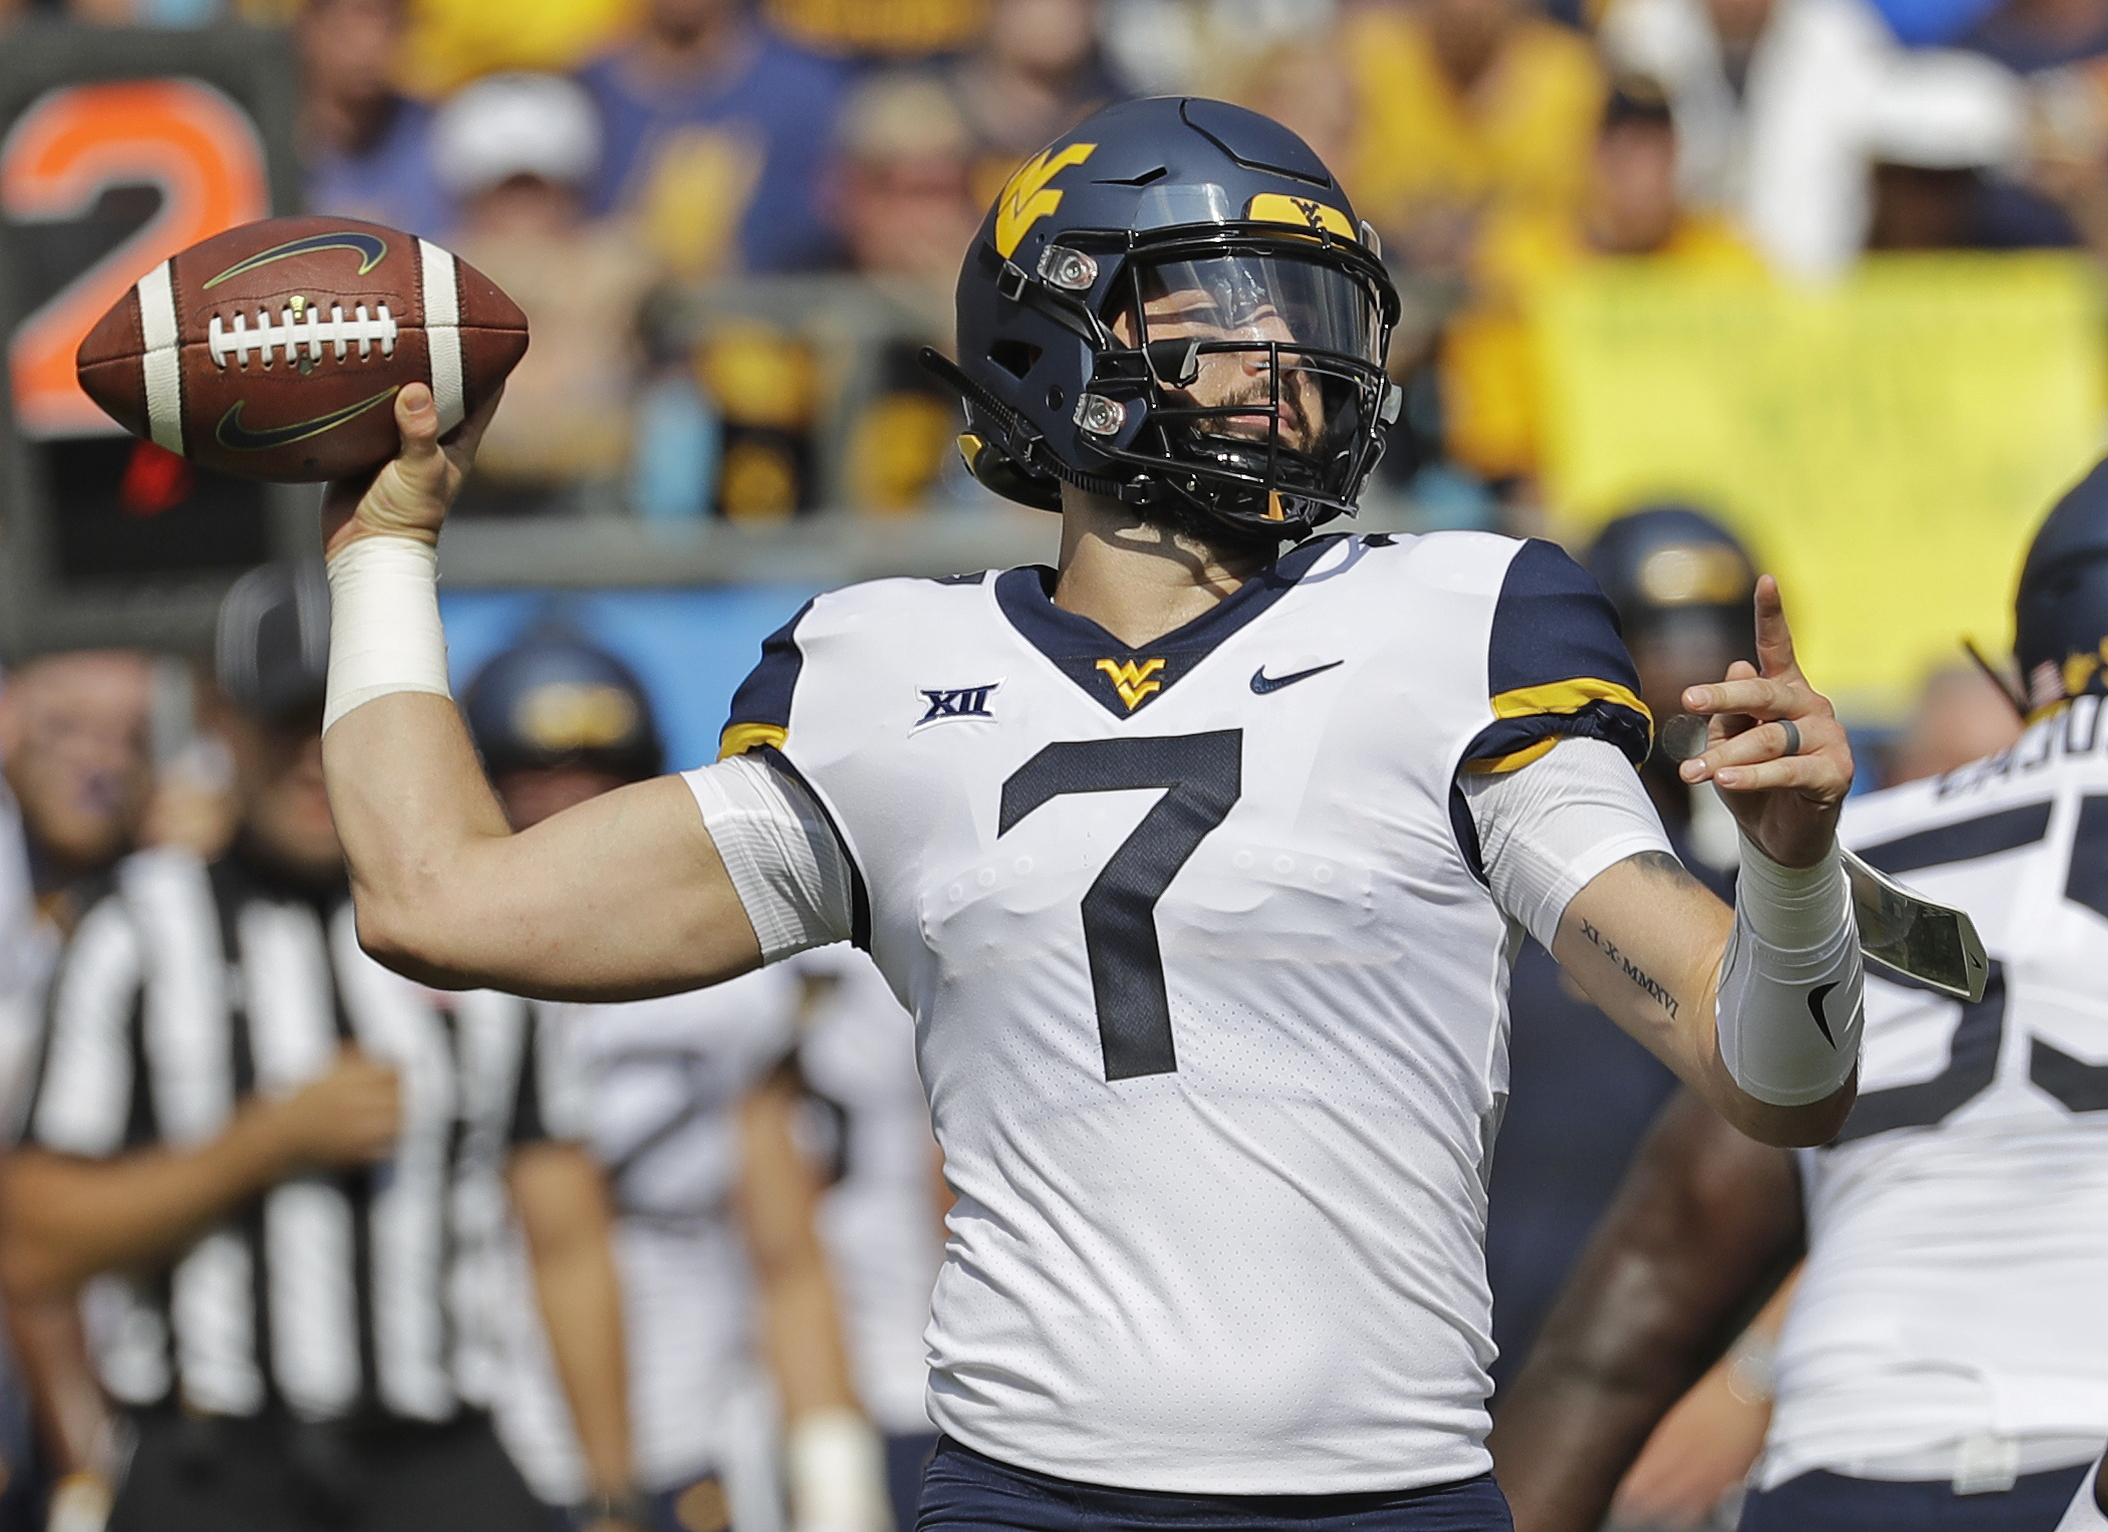 Grier leads No. 17 West Virginia past Tennessee 40-14